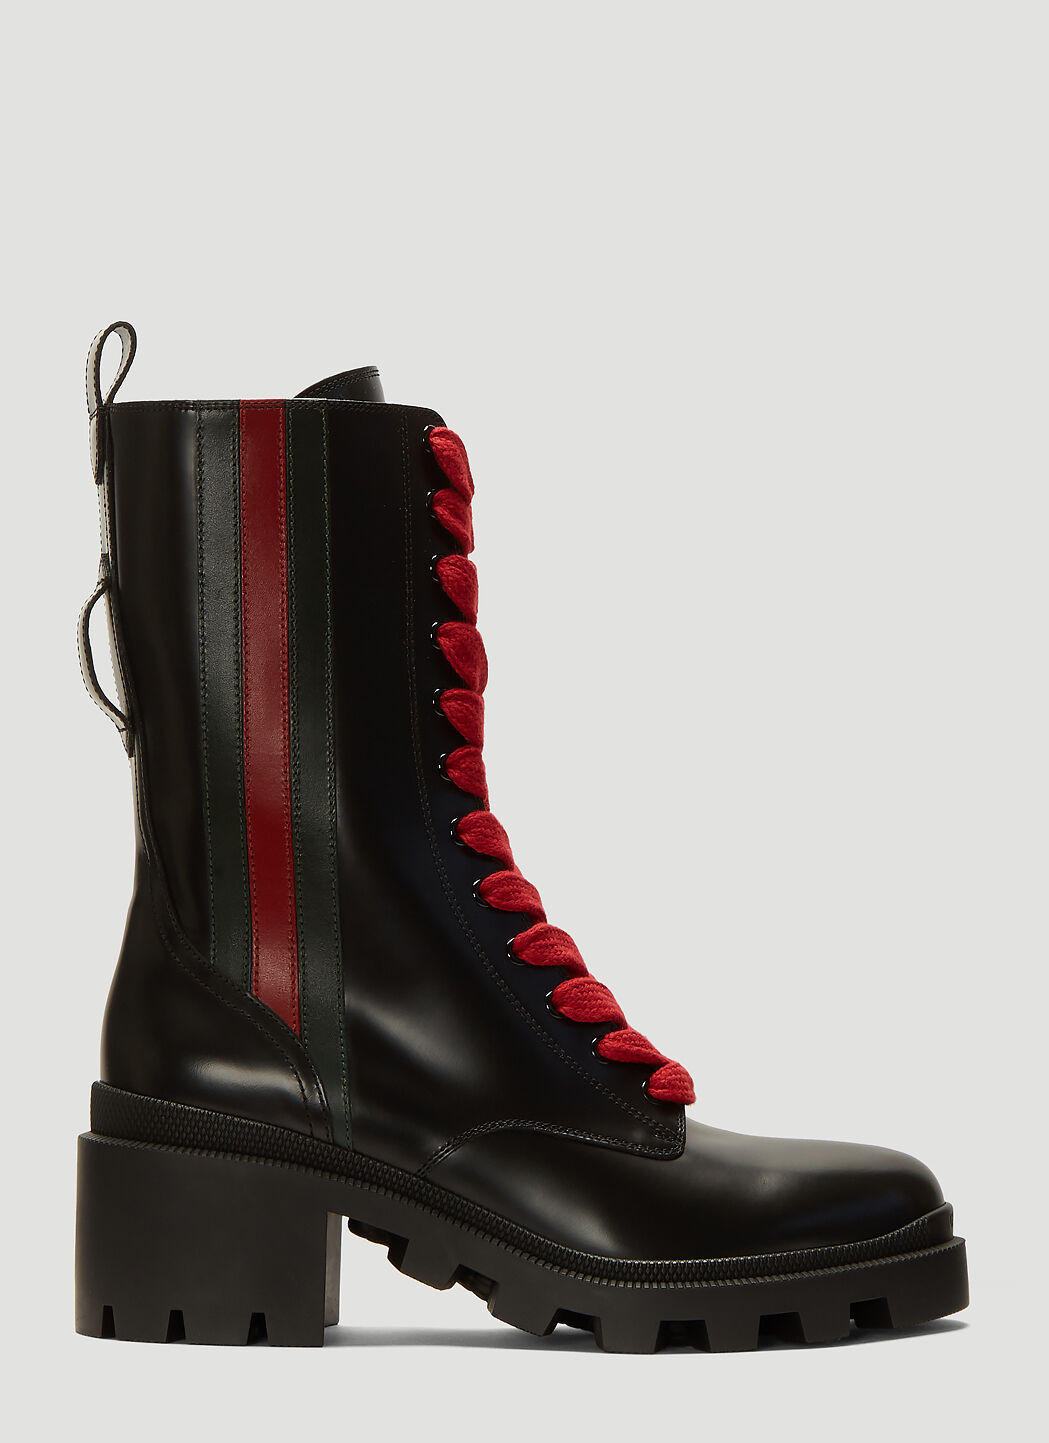 Gucci Web-Trim Leather Boots in Black